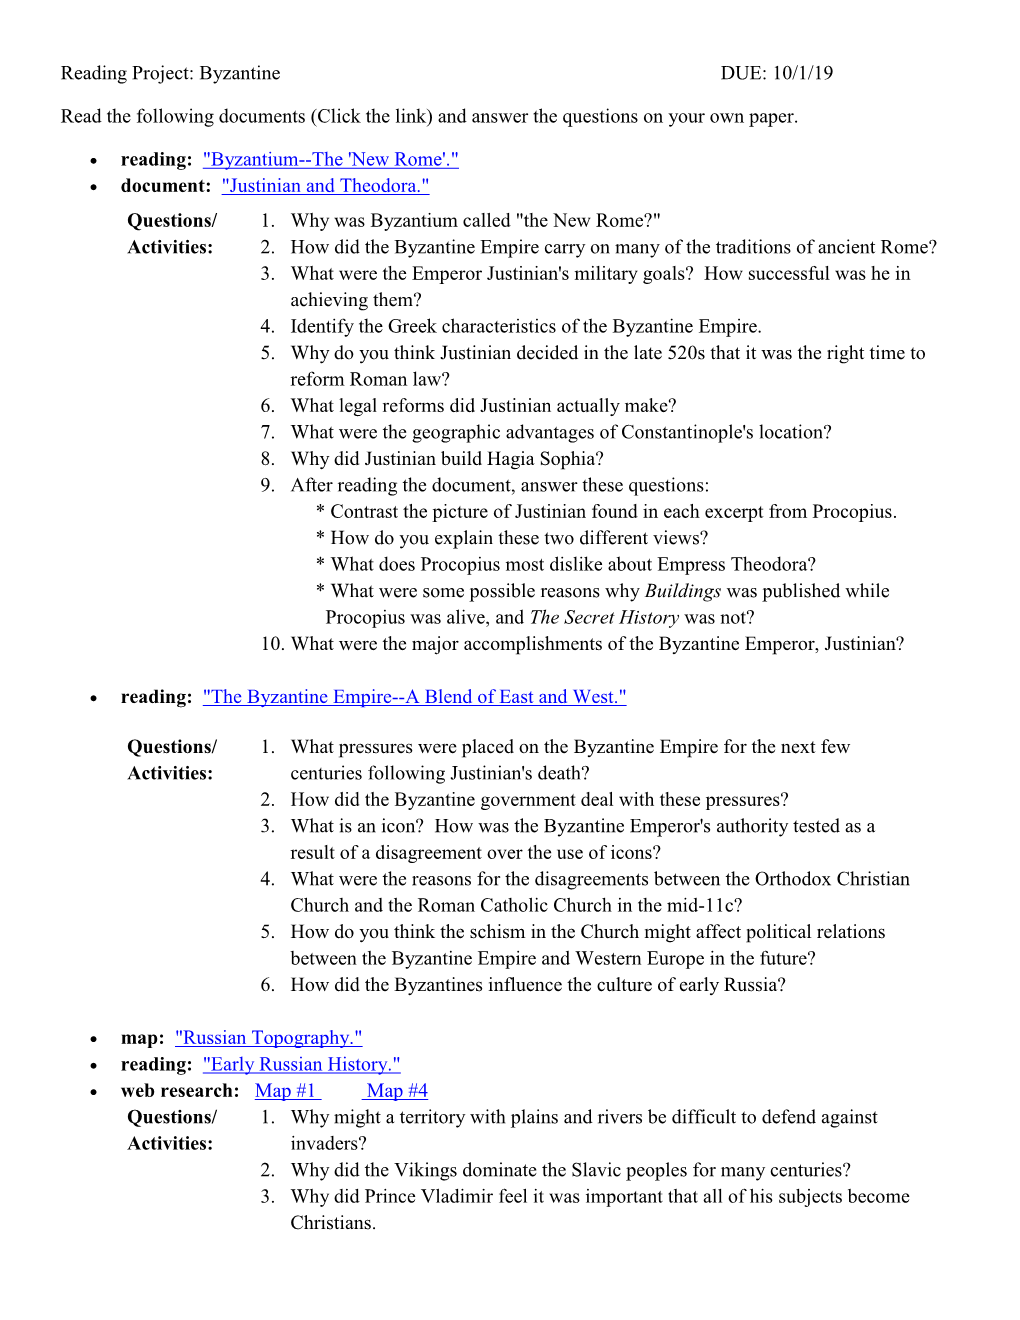 Byzantine DUE: 10/1/19 Read the Following Documents